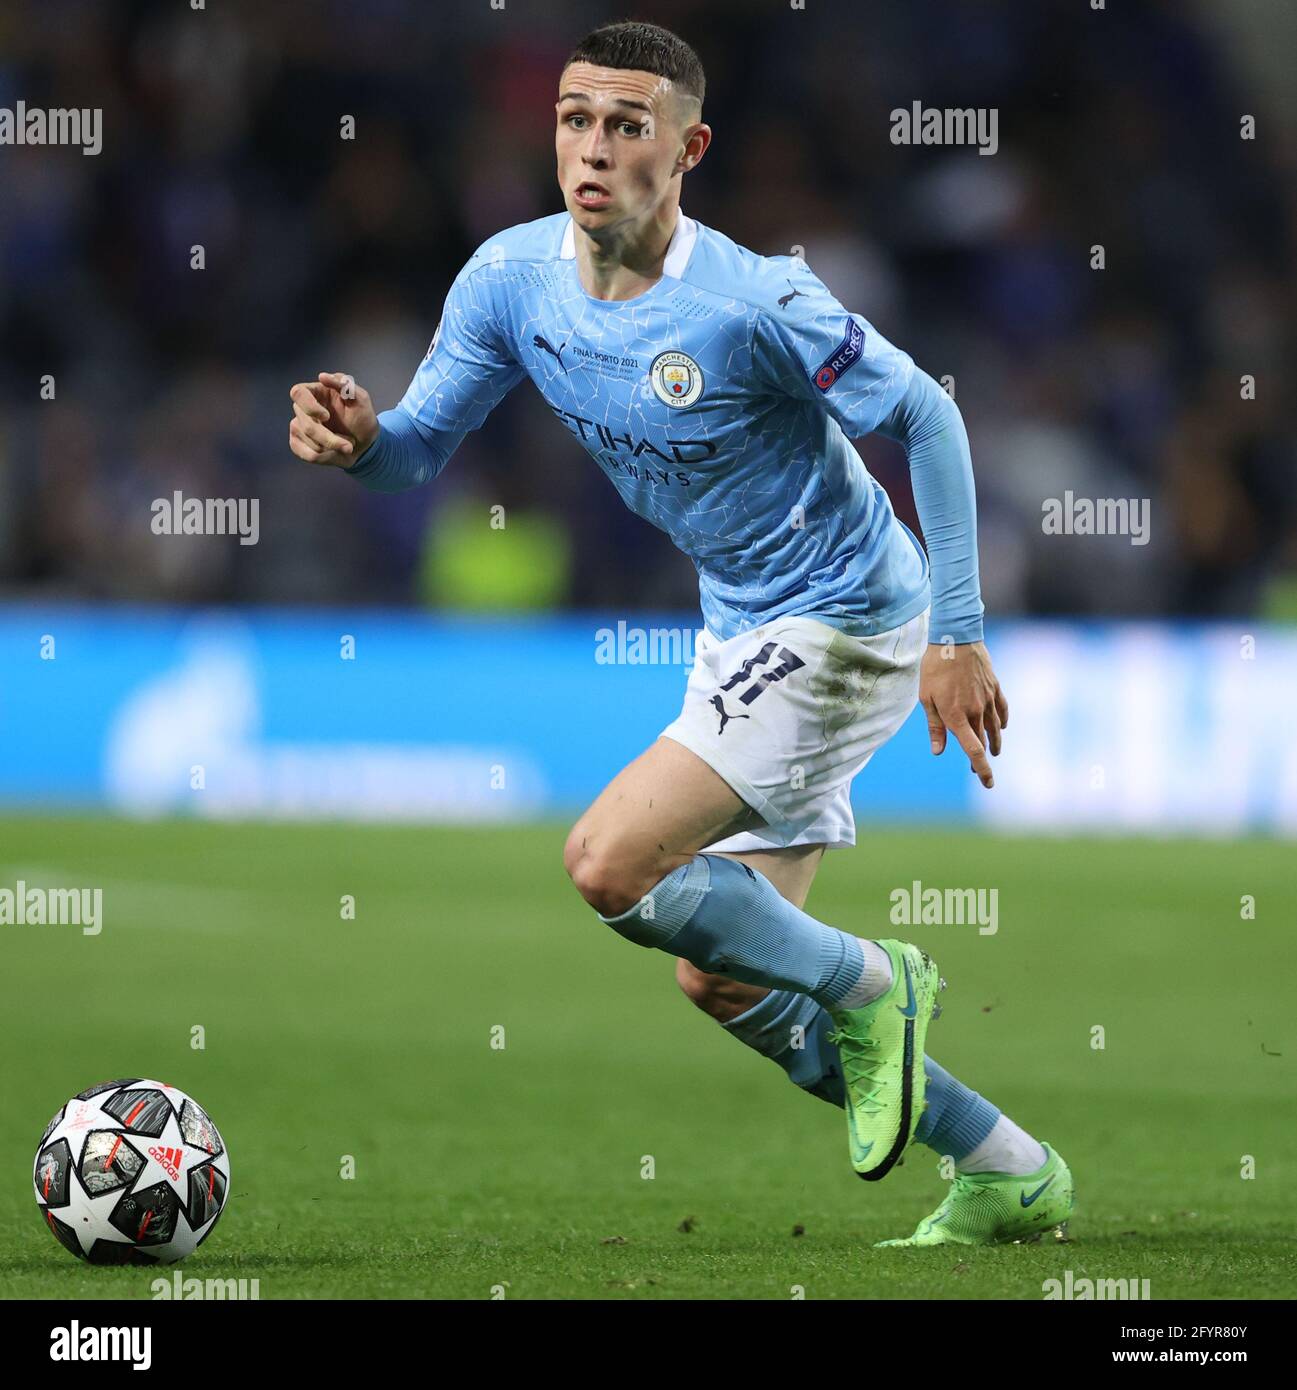 PORTO, PORTUGAL - MAY 29: Phil Foden of Manchester City during the UEFA Champions League Final between Manchester City and Chelsea FC at Estadio do Dragao on May 29, 2021 in Porto, Portugal. (Photo by MB Media) Stock Photo